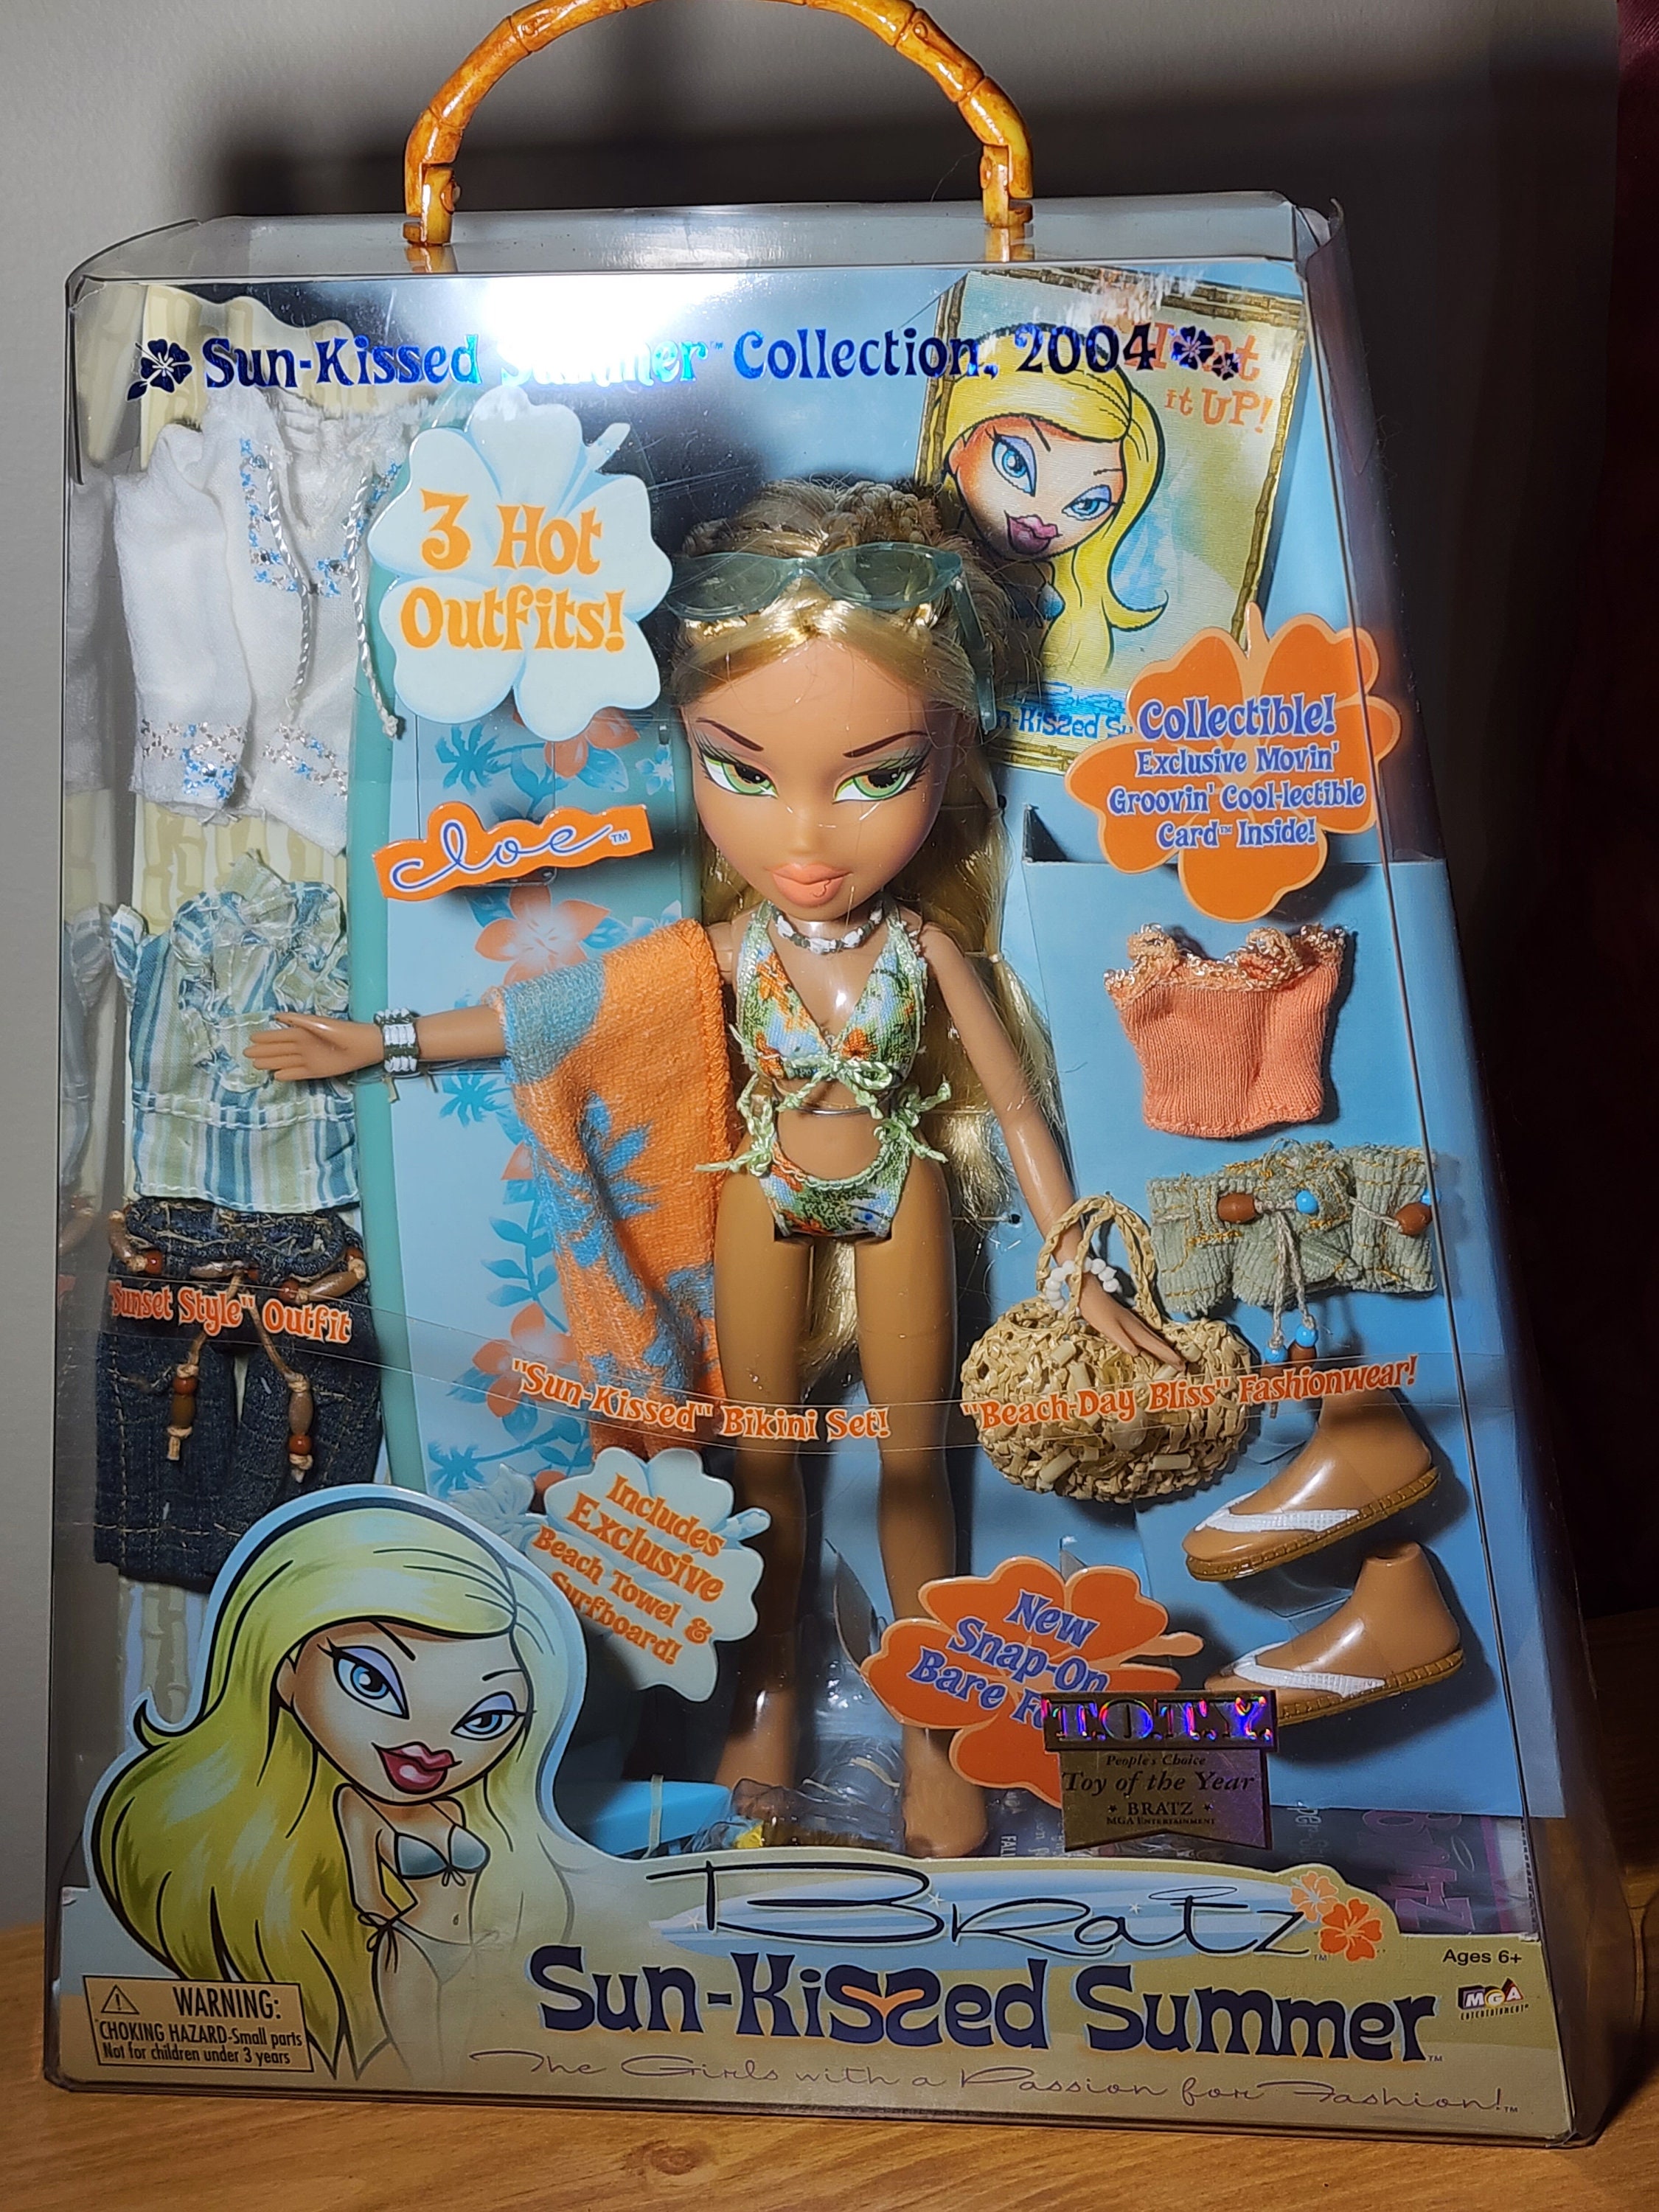 Bratz Sun Kissed Summer 2004 Yasmin Doll 3 HOT Outfits 2004 Toy Of